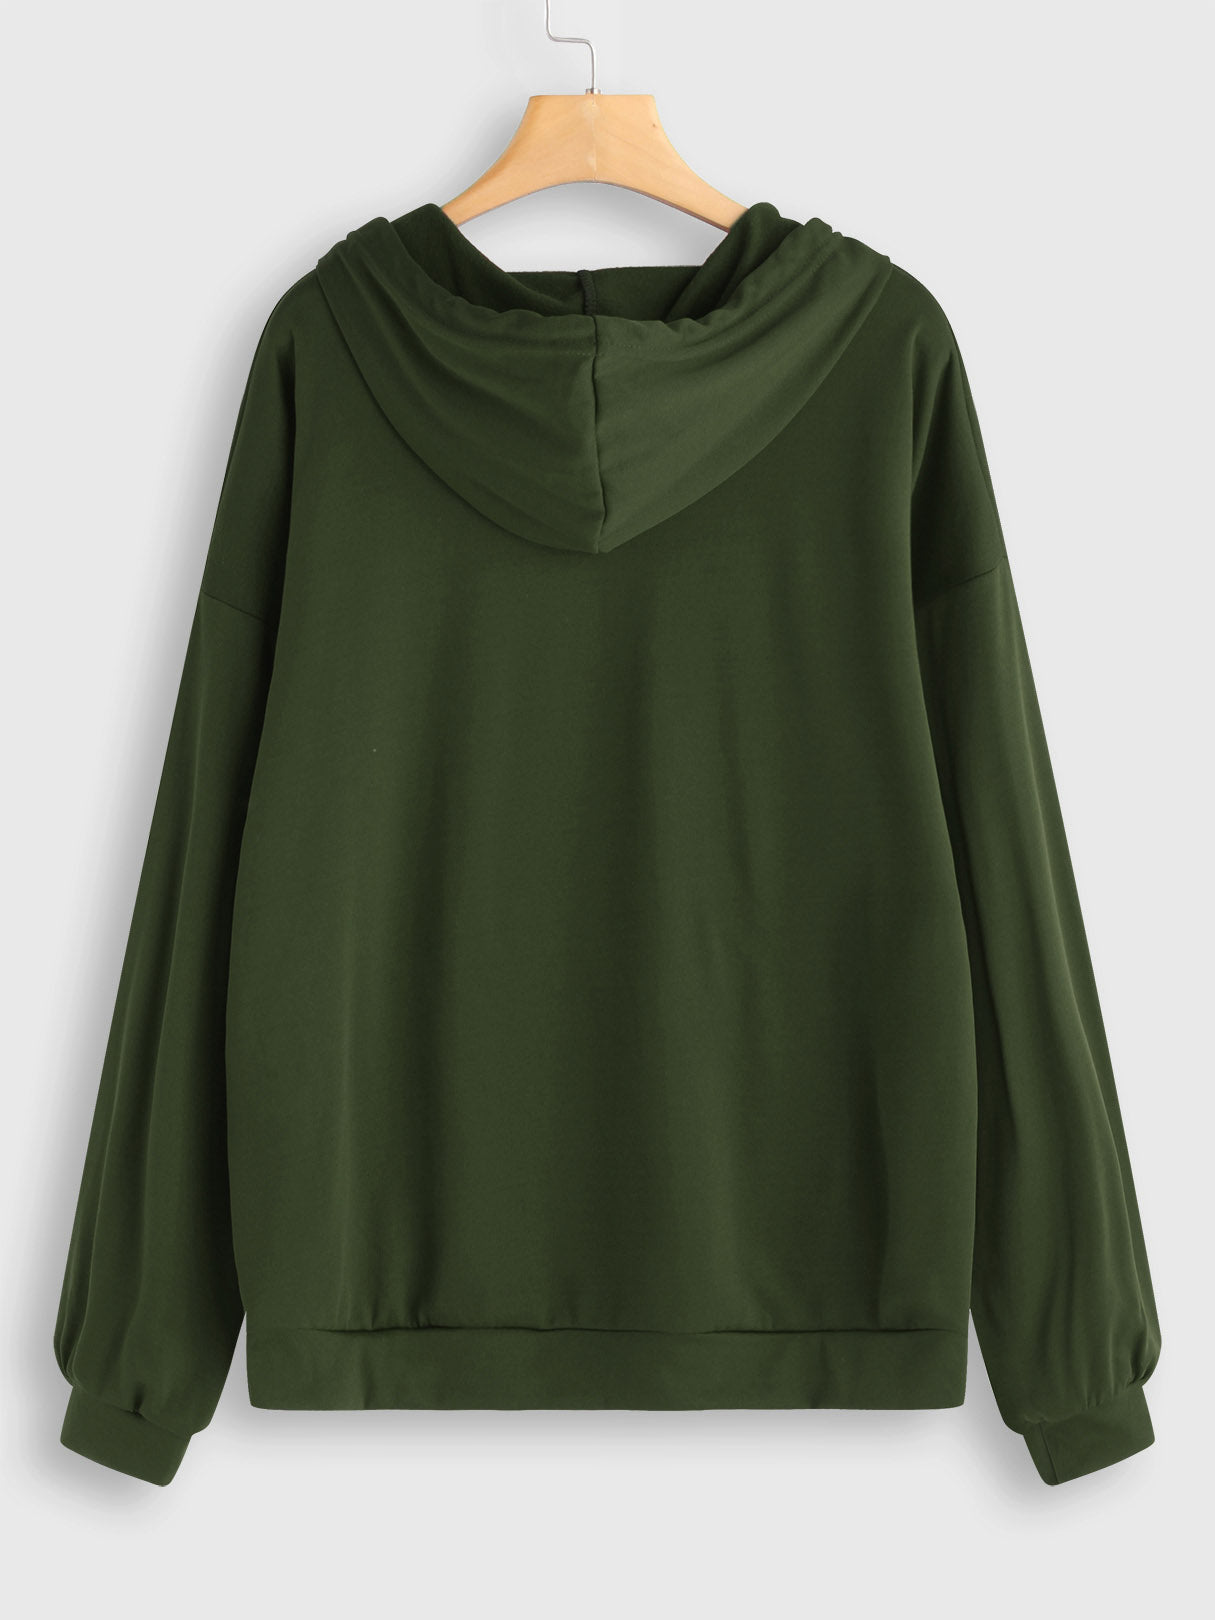 NEW FEELING Womens Army Green Plus Size Tops